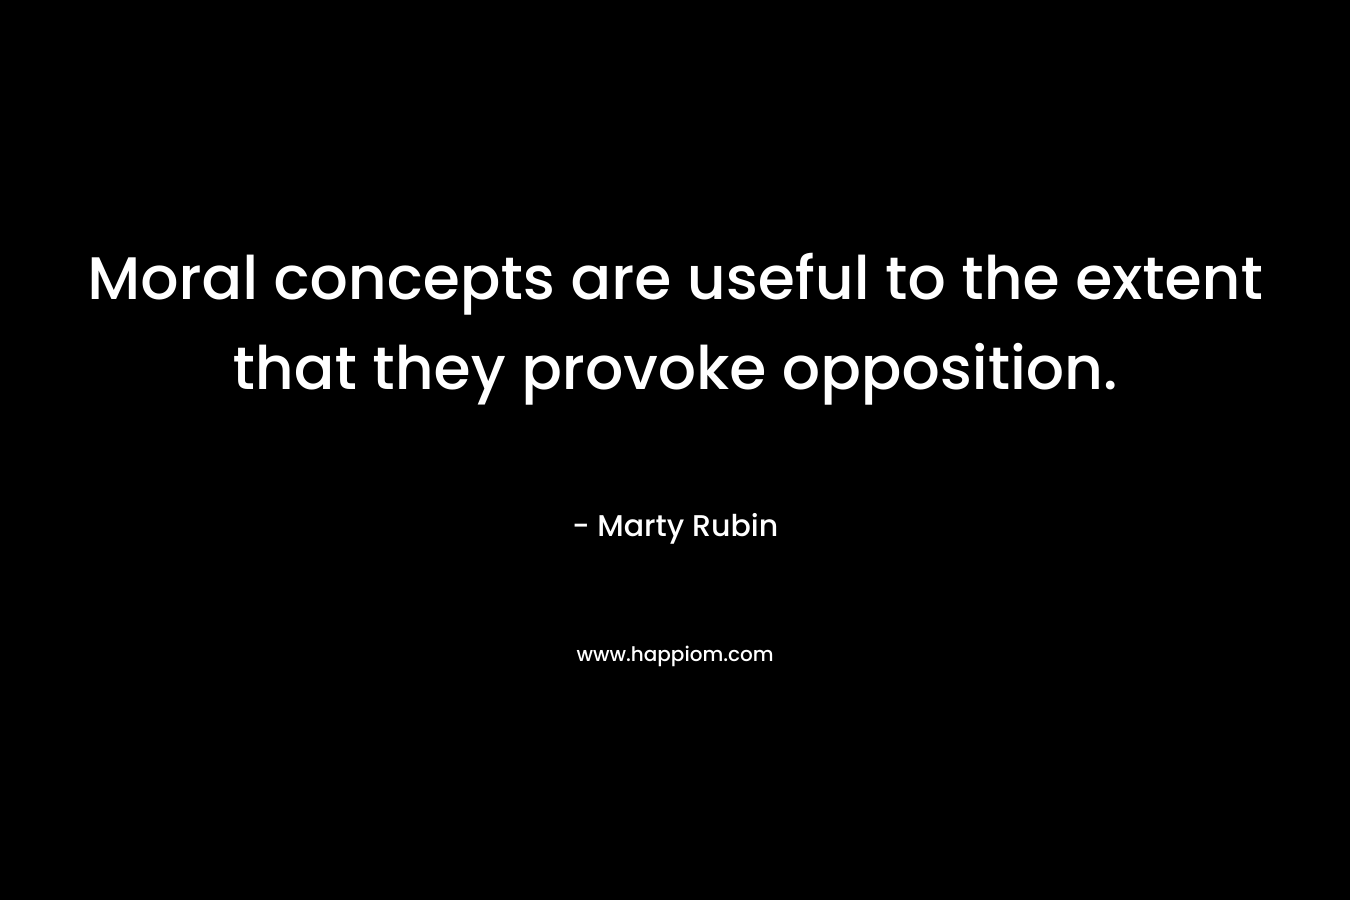 Moral concepts are useful to the extent that they provoke opposition. – Marty Rubin